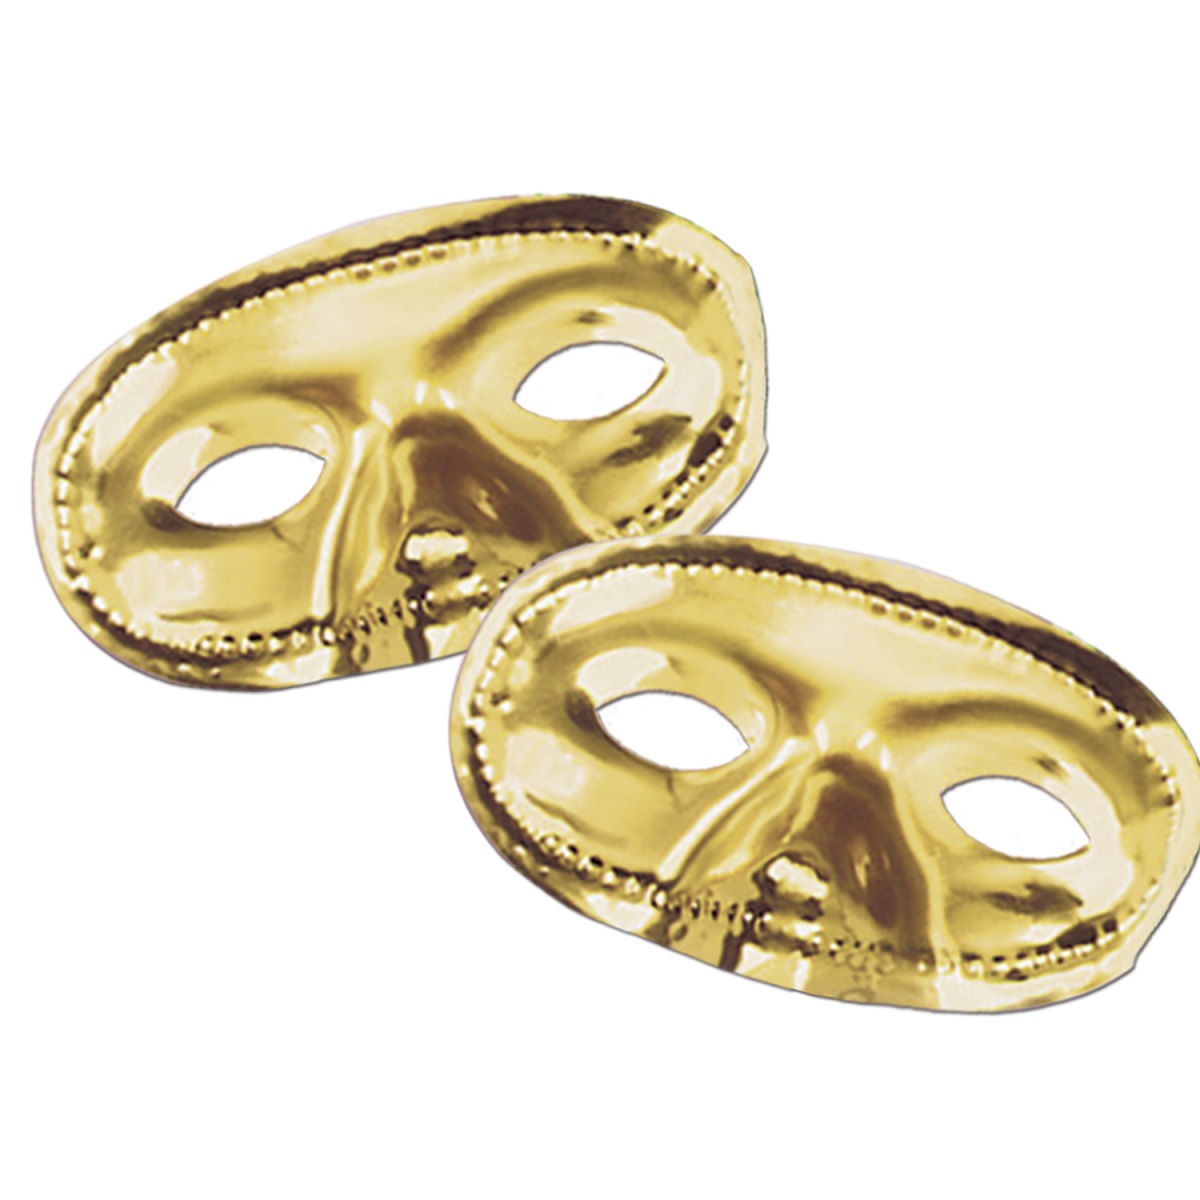 Party Central Club Pack of 24 Gold Vegas Gold Masquerade Unisex Adult Mardi Gras Half Masks - One Size